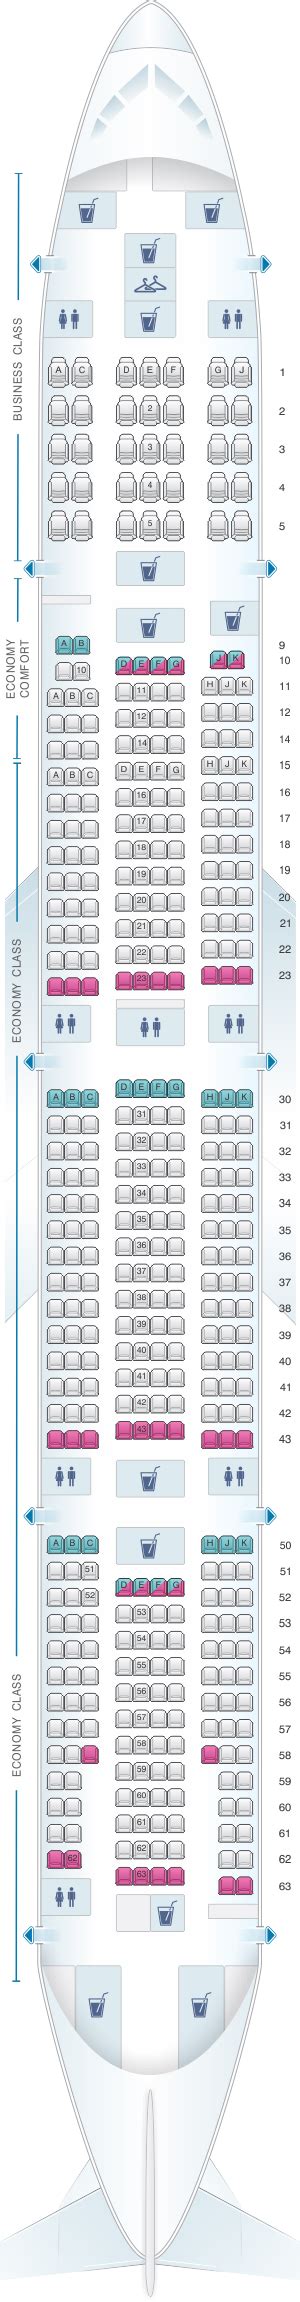 Klm Boeing Er Seating Chart Tutorial Pics Hot Sex Picture